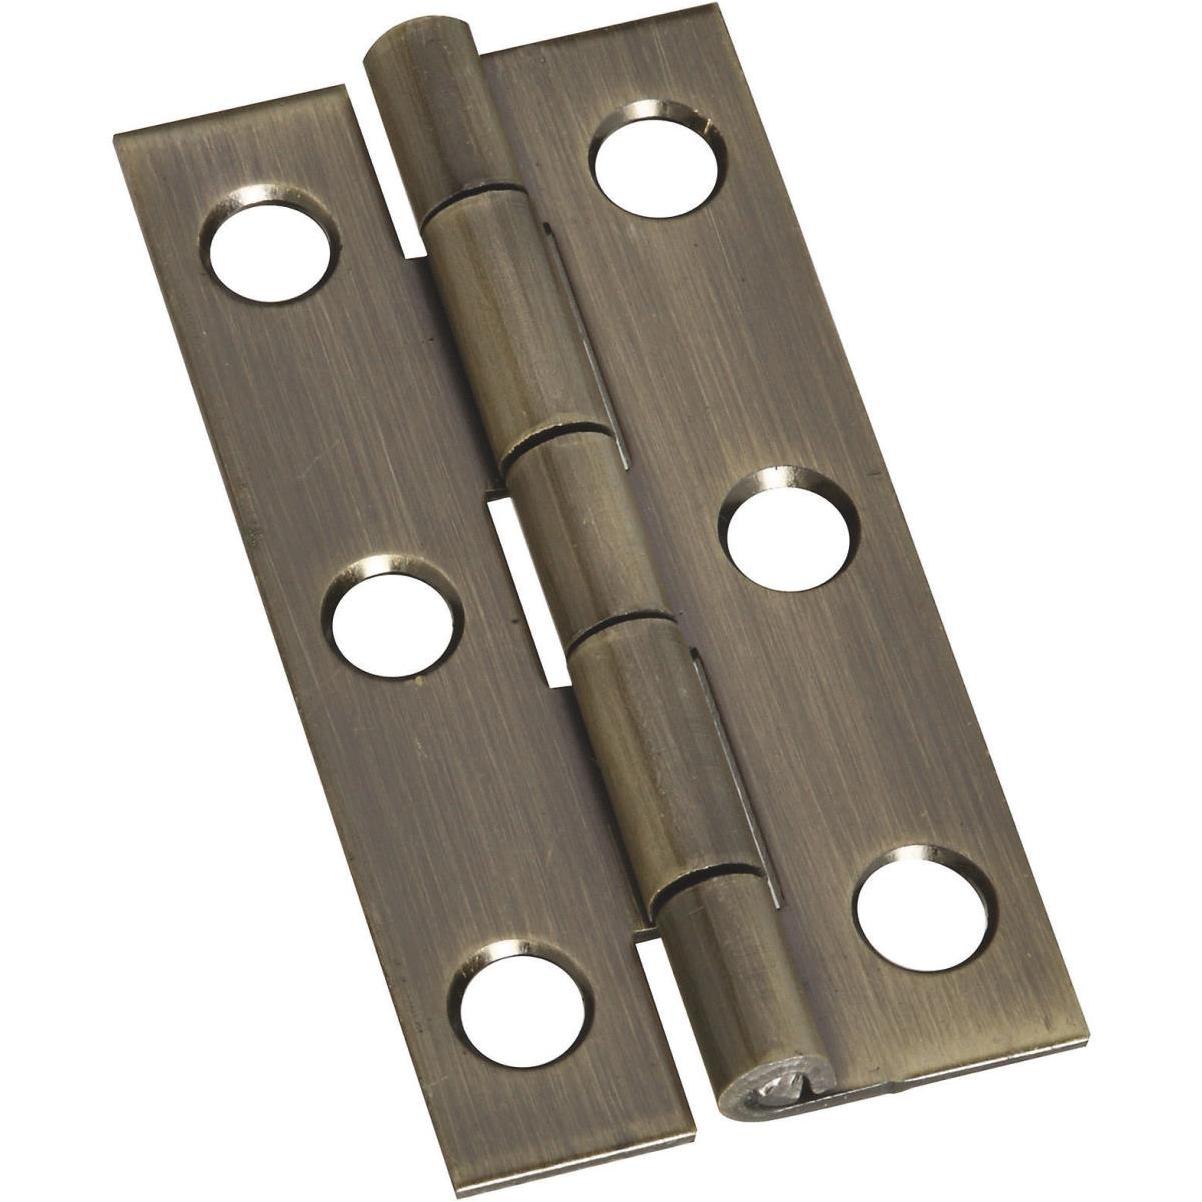 National 1 In. x 2 In. Antique Brass Narrow Decorative Hinge (2